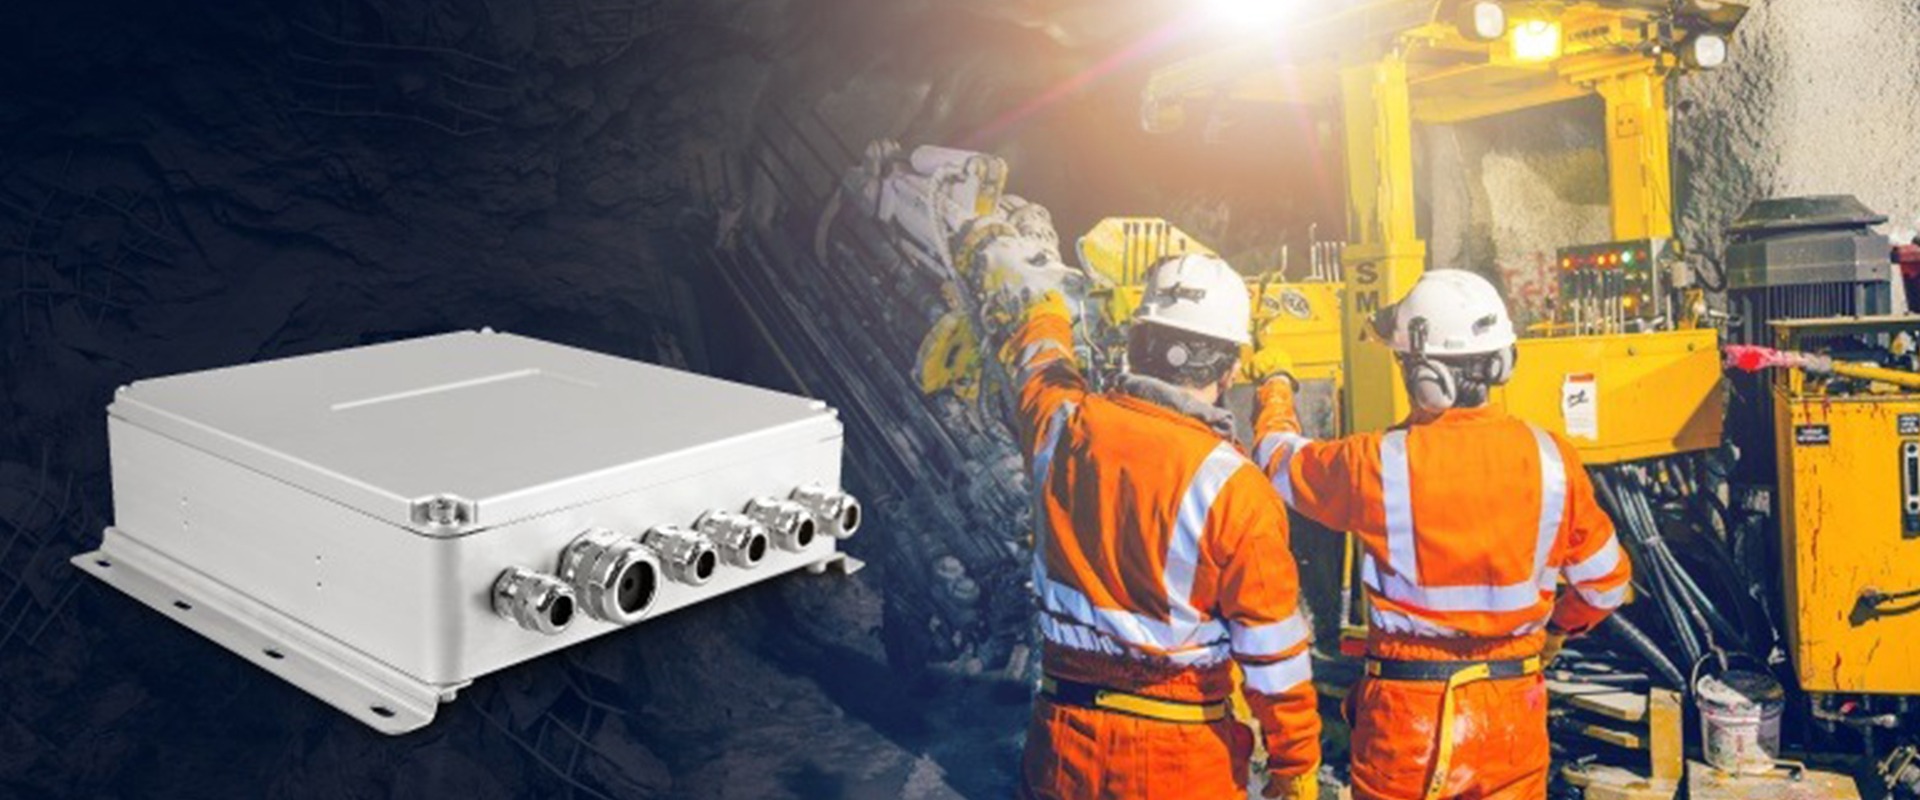 Notes on Rugged Design: Creating the VIA Mobile360 AI Mining Safety Kit